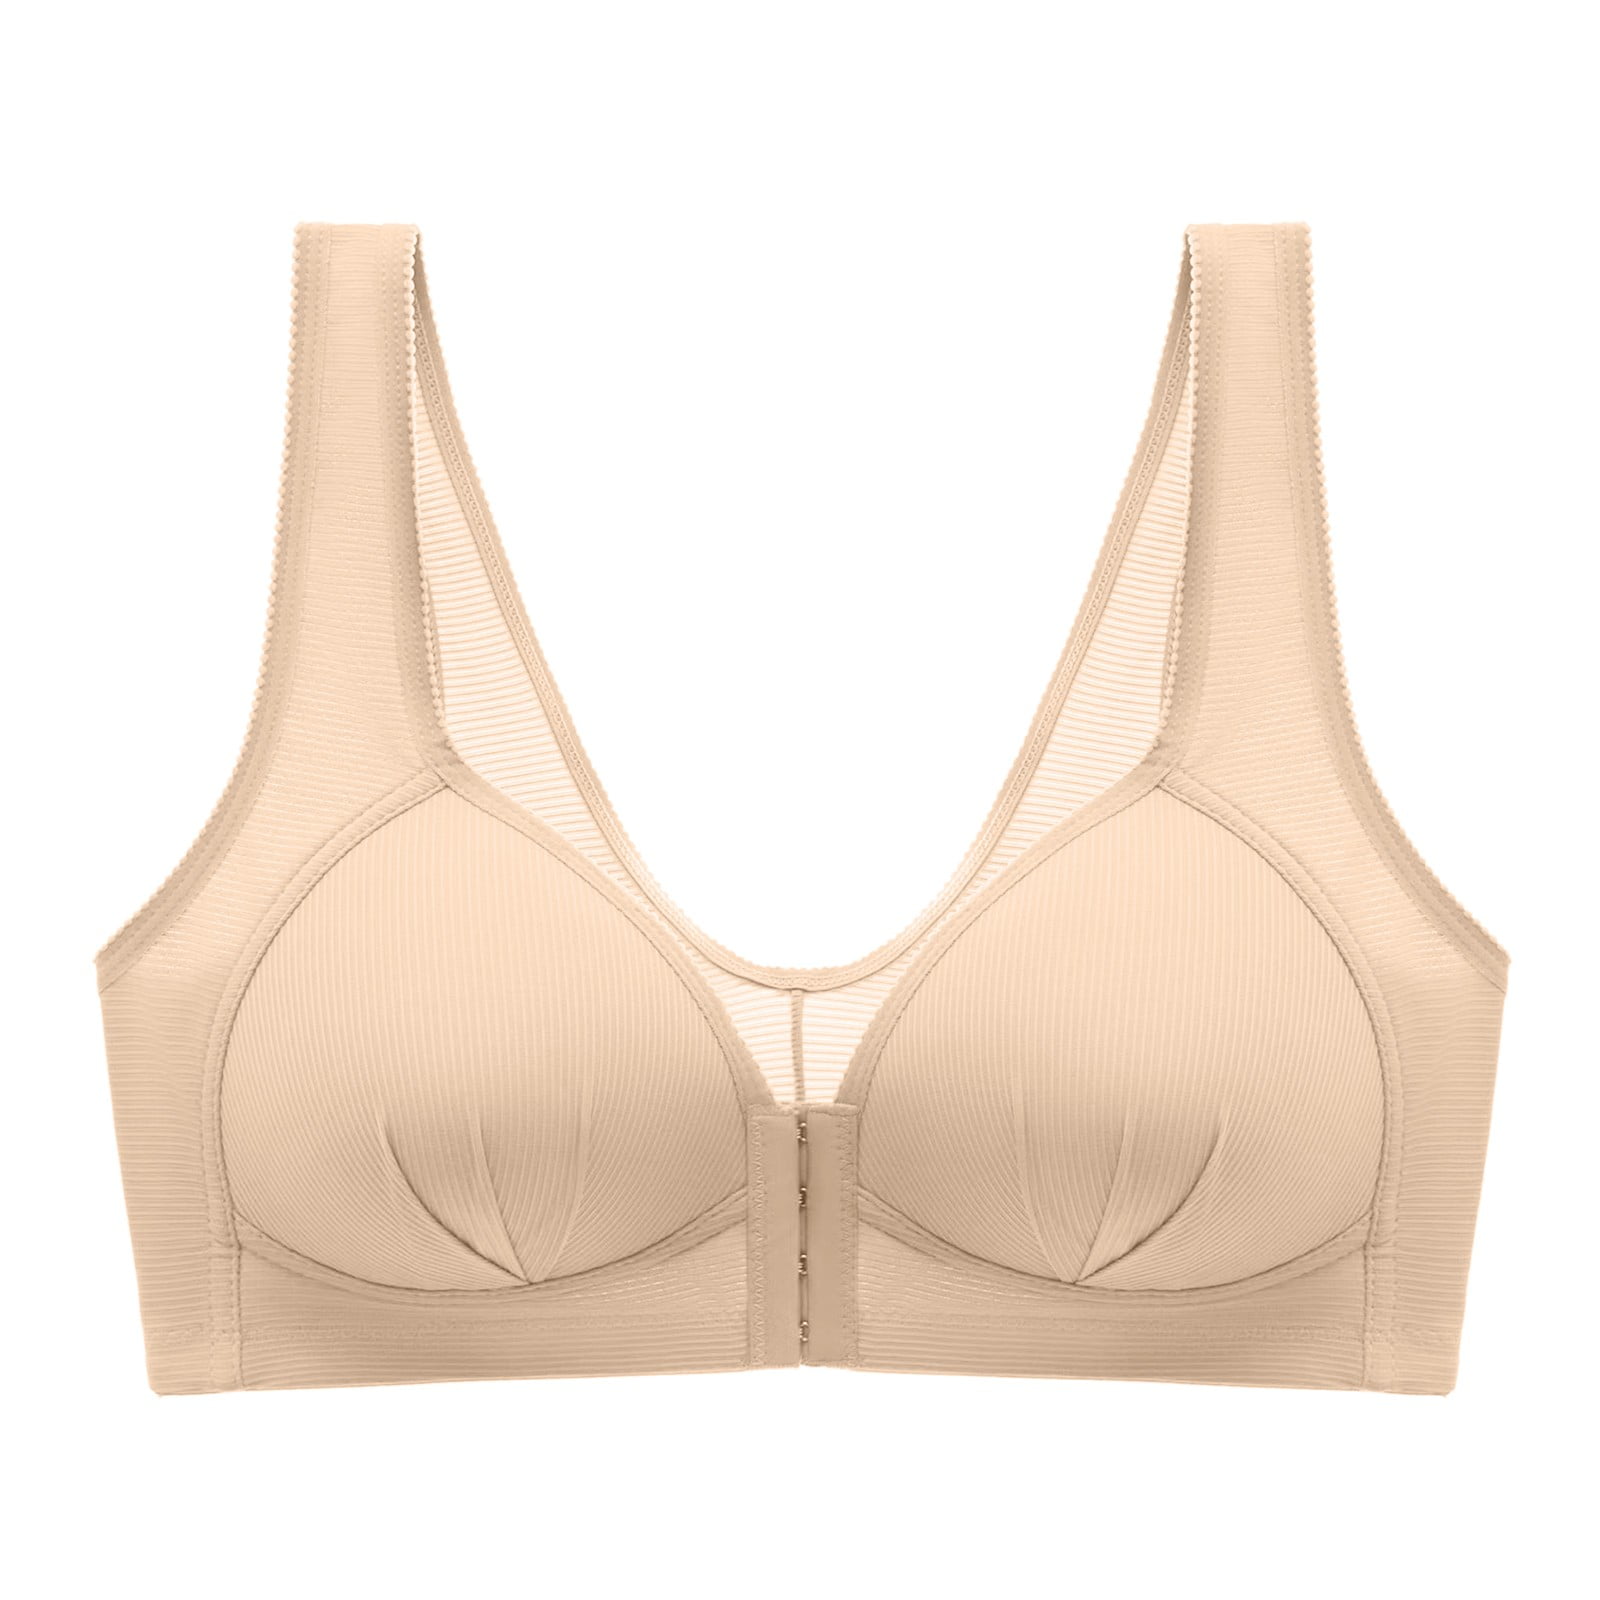 Our Favourite Bras For Syle, Comfort, Support And Fit From Hudson's Bay -  29Secrets